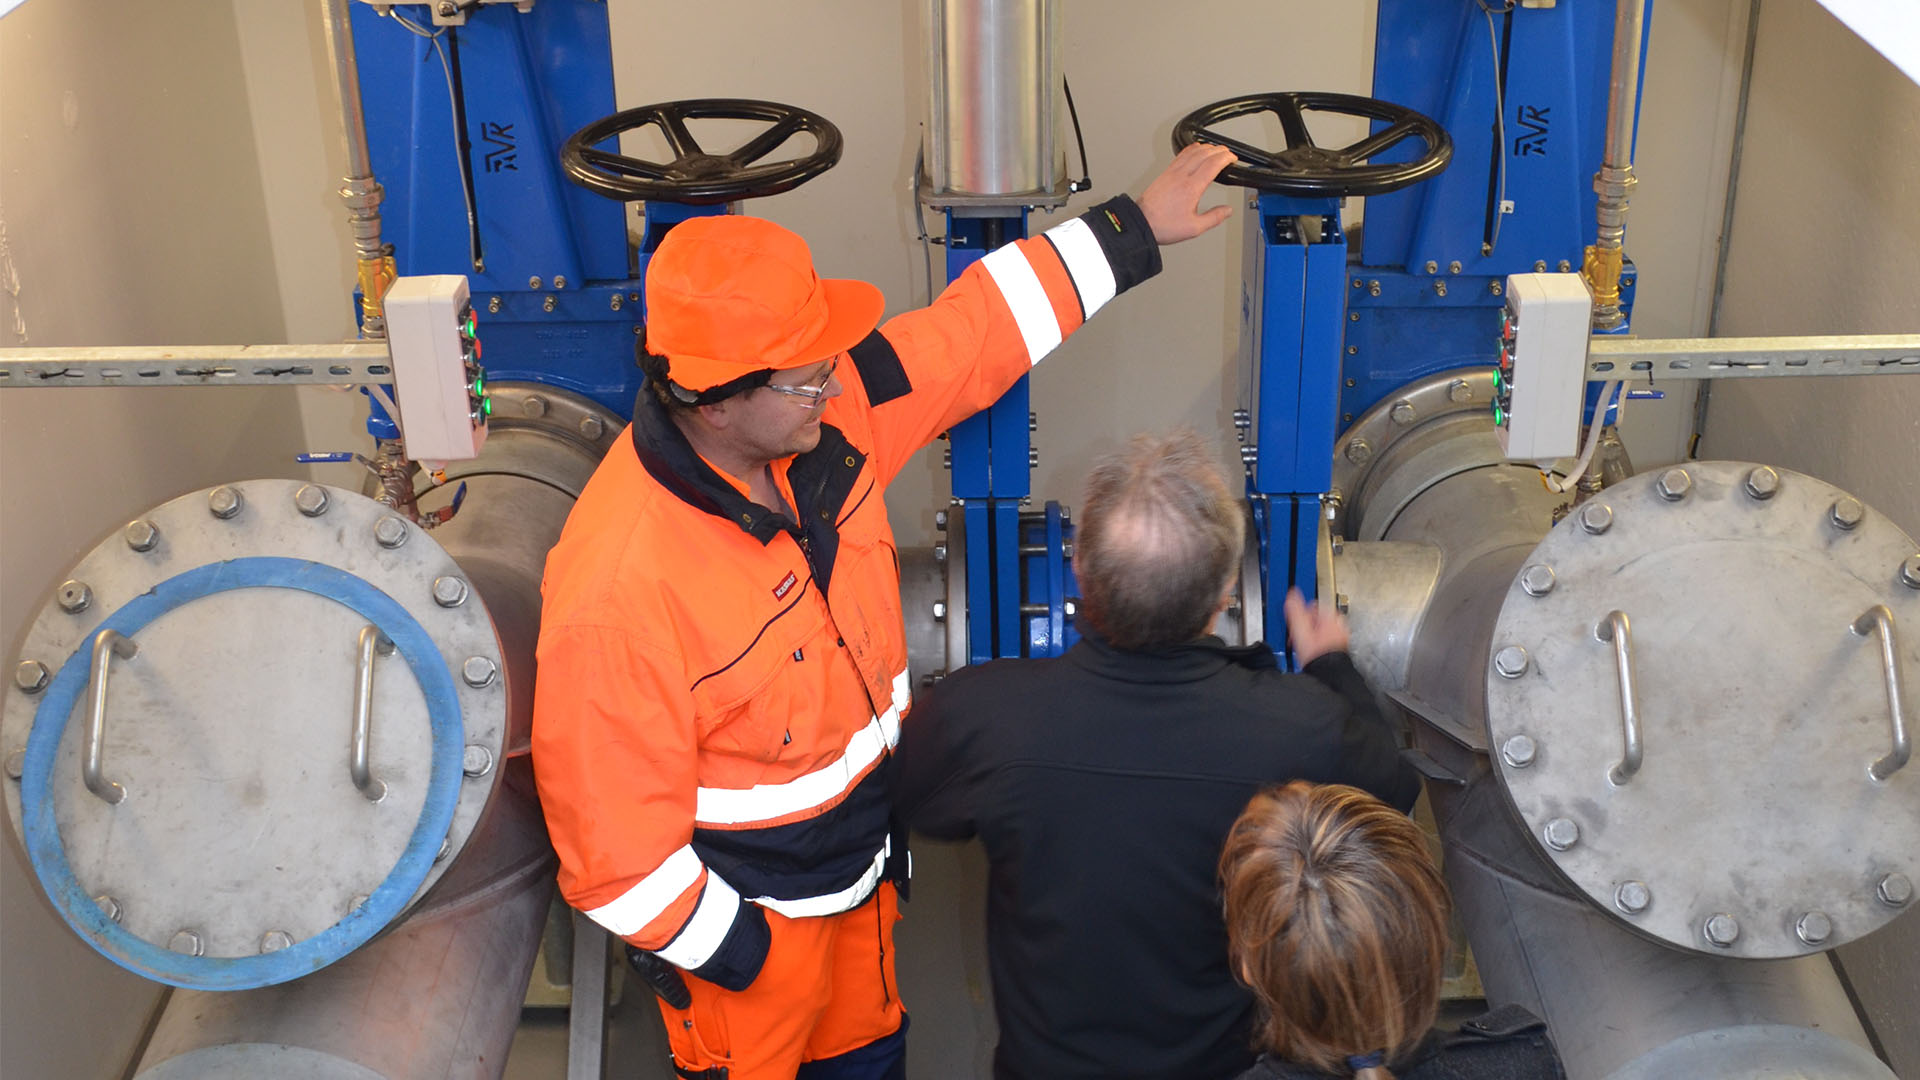 Representive from Ebeltoft pumping station presents some of the installed AVK valves 